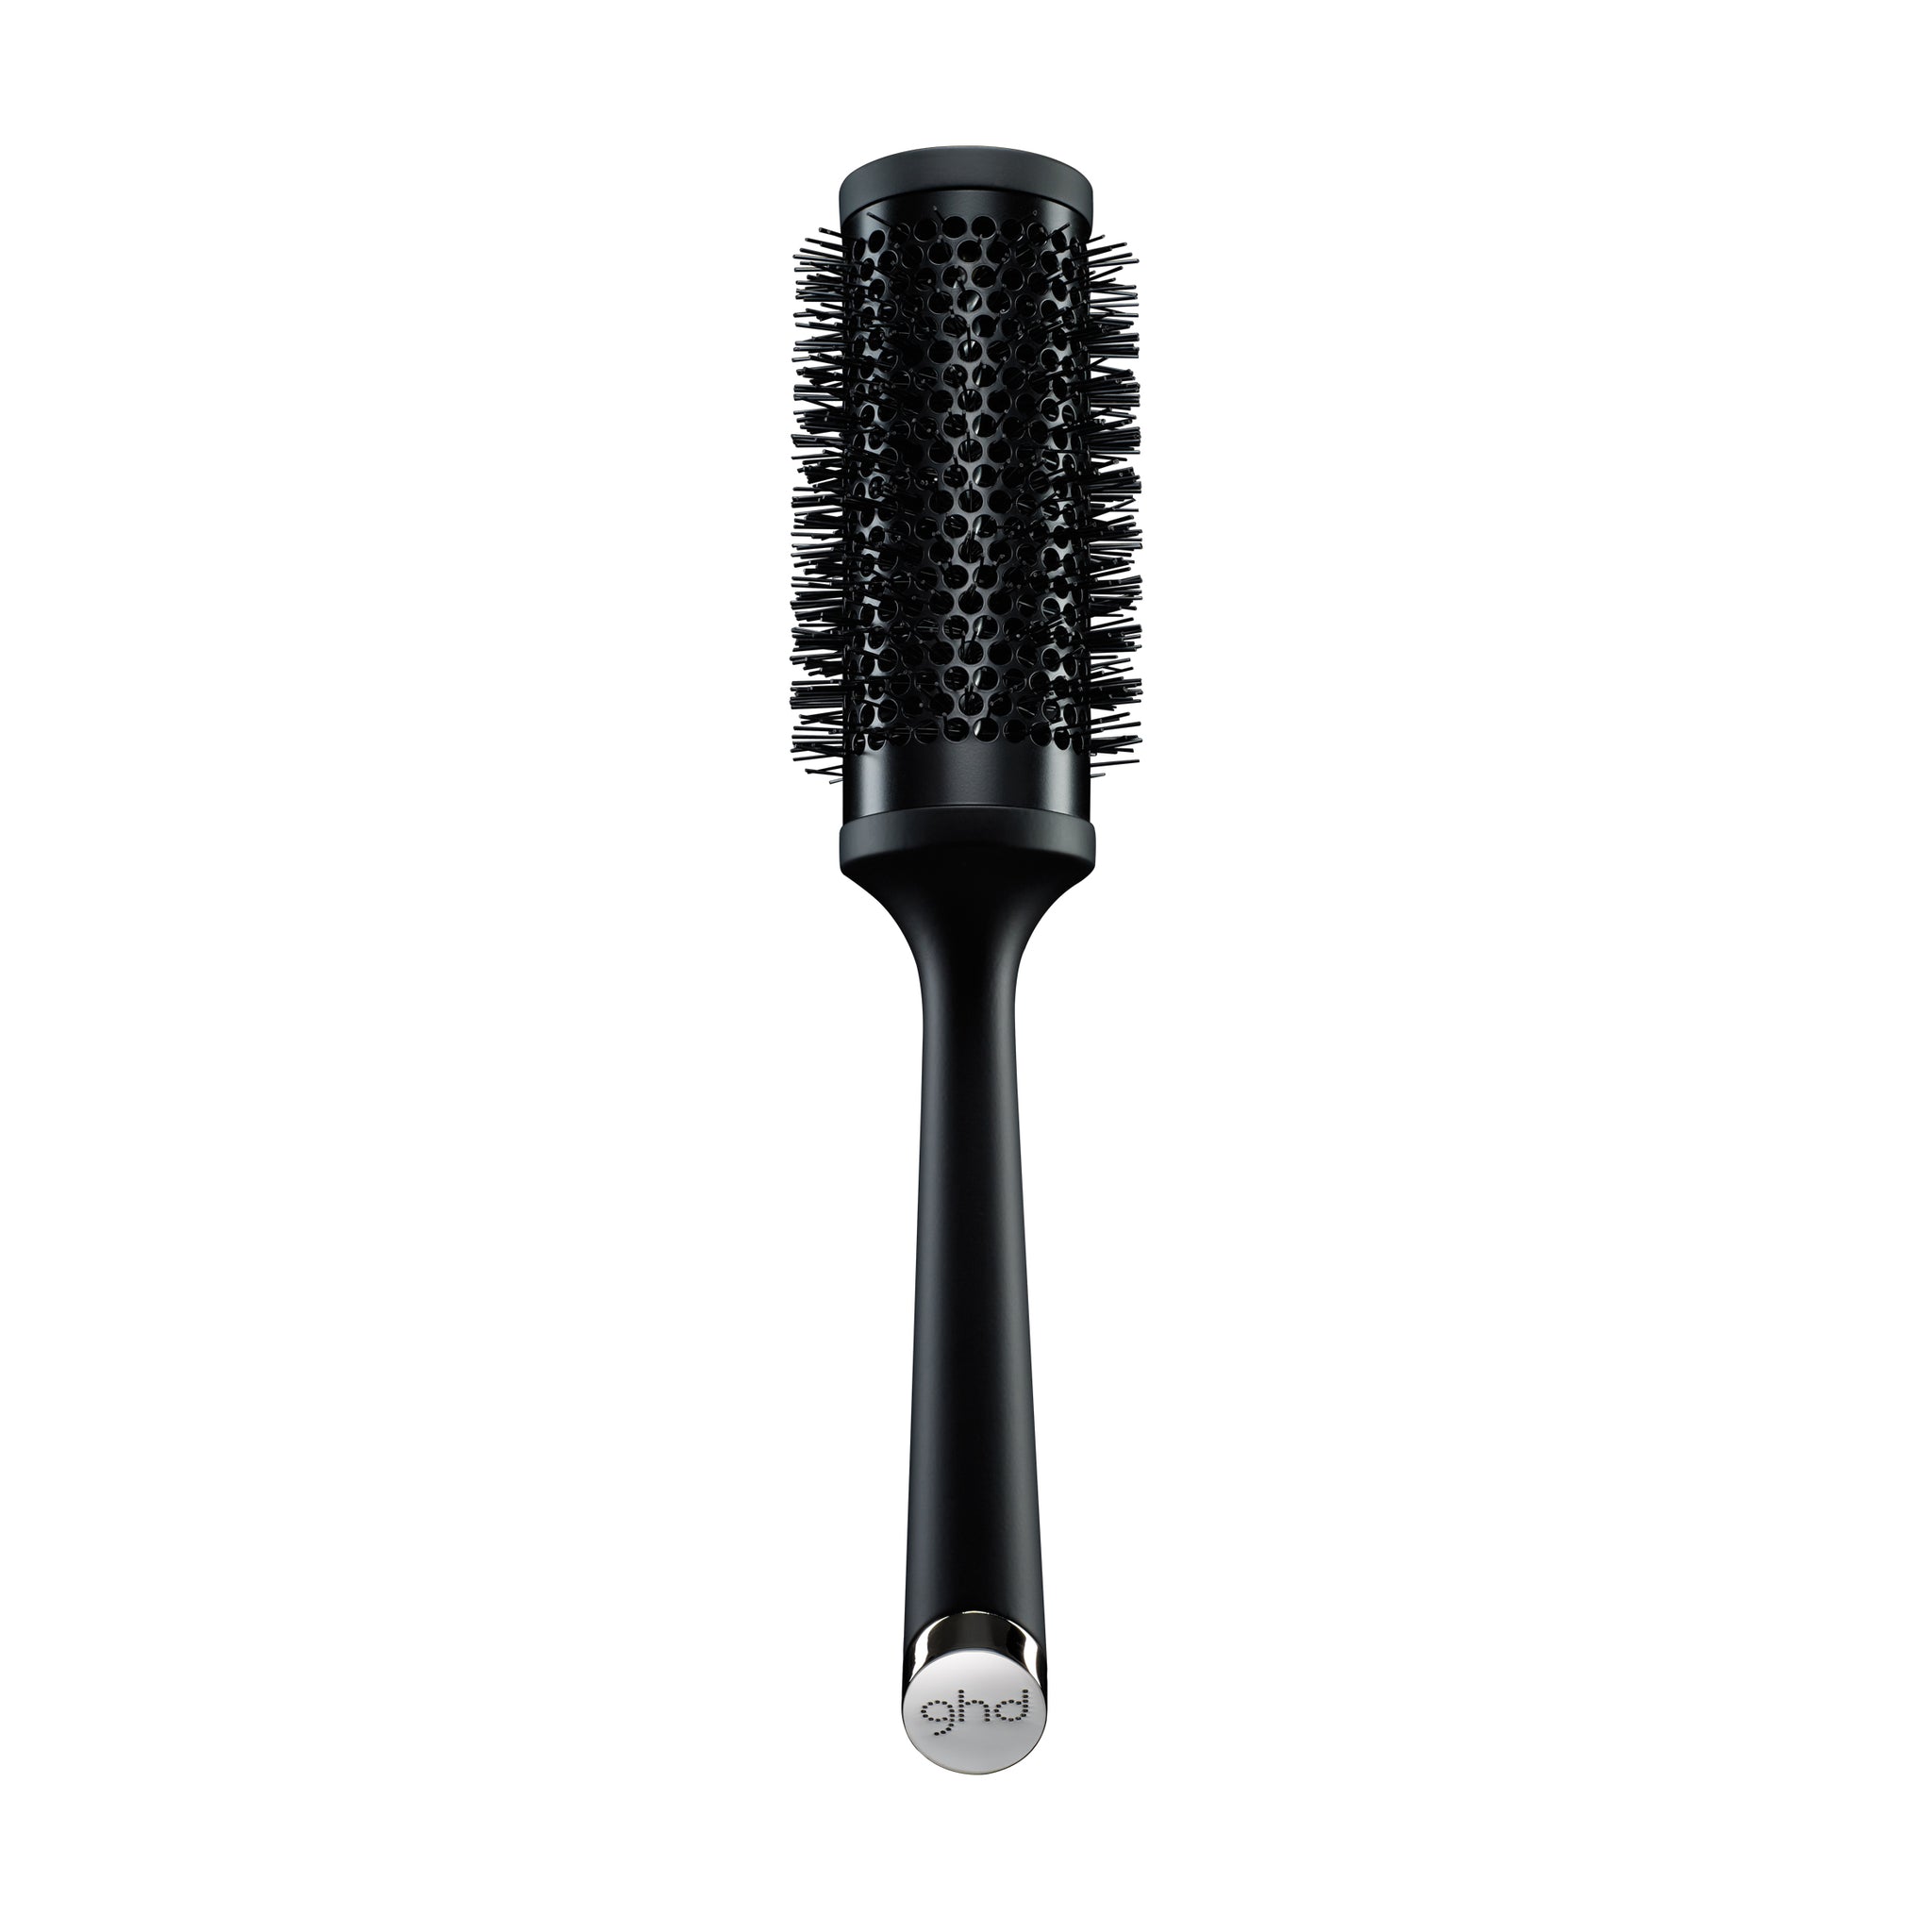 Brosse céramique ronde Ghd Taille 3 - 45 mm